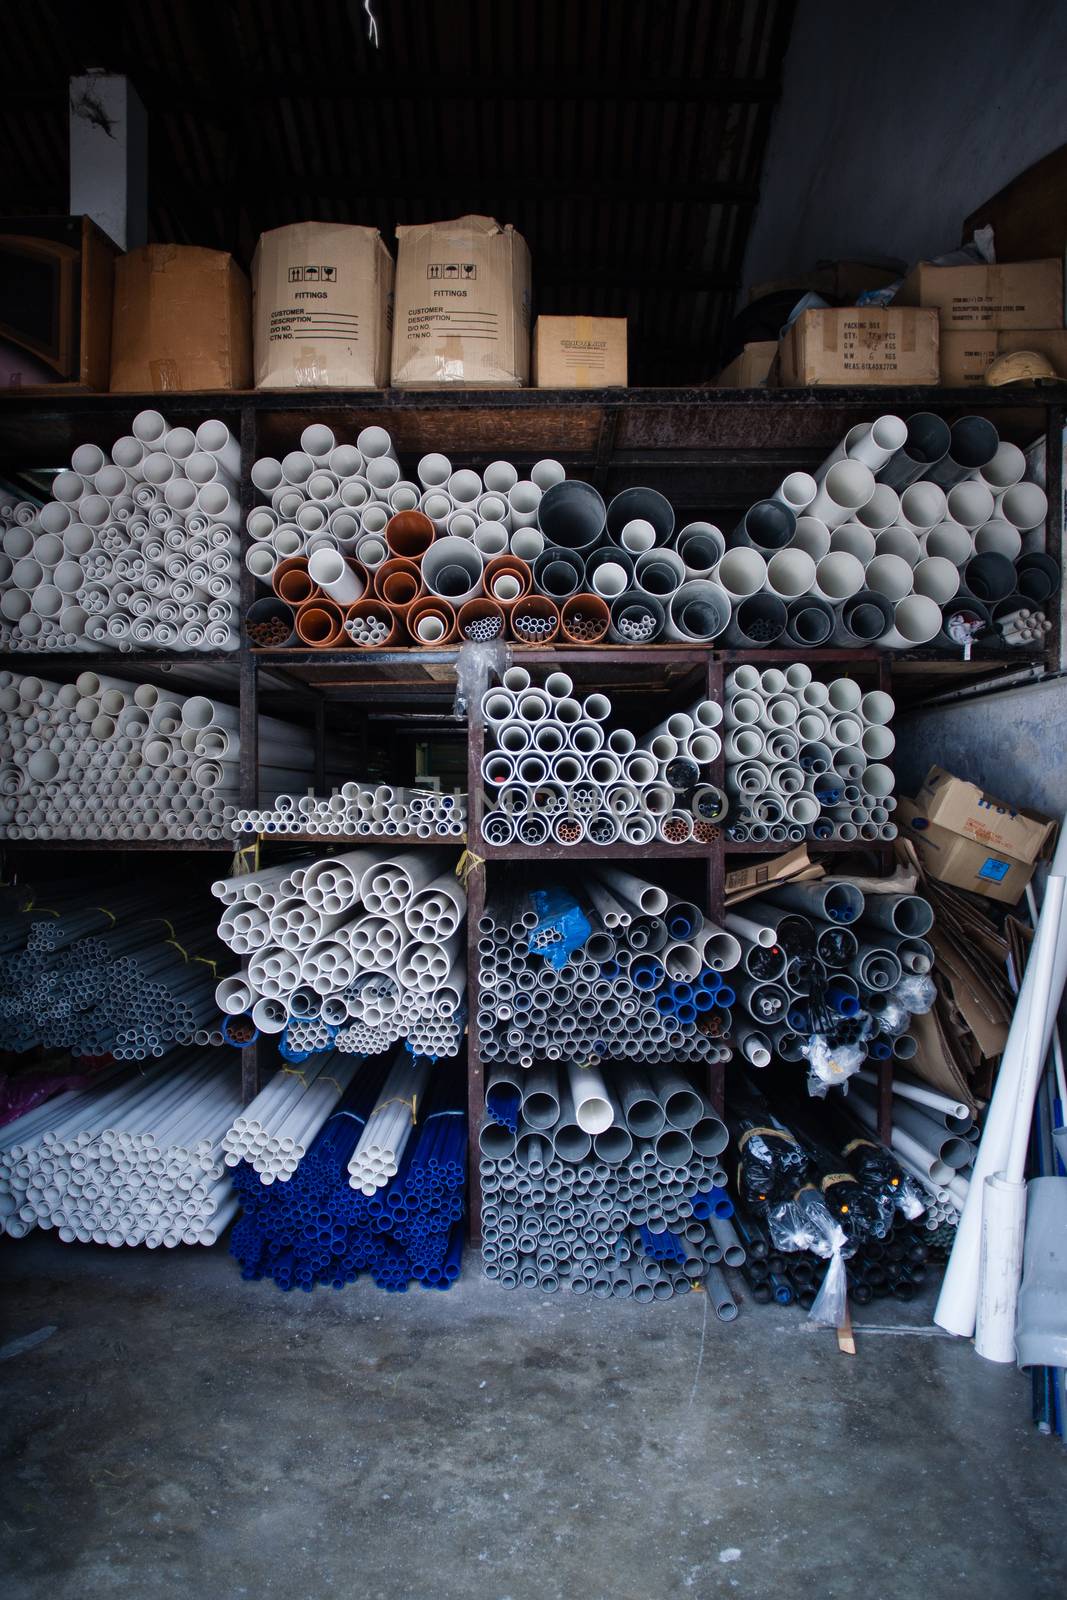 Boxes of grey and white plastic pipes by Vanzyst